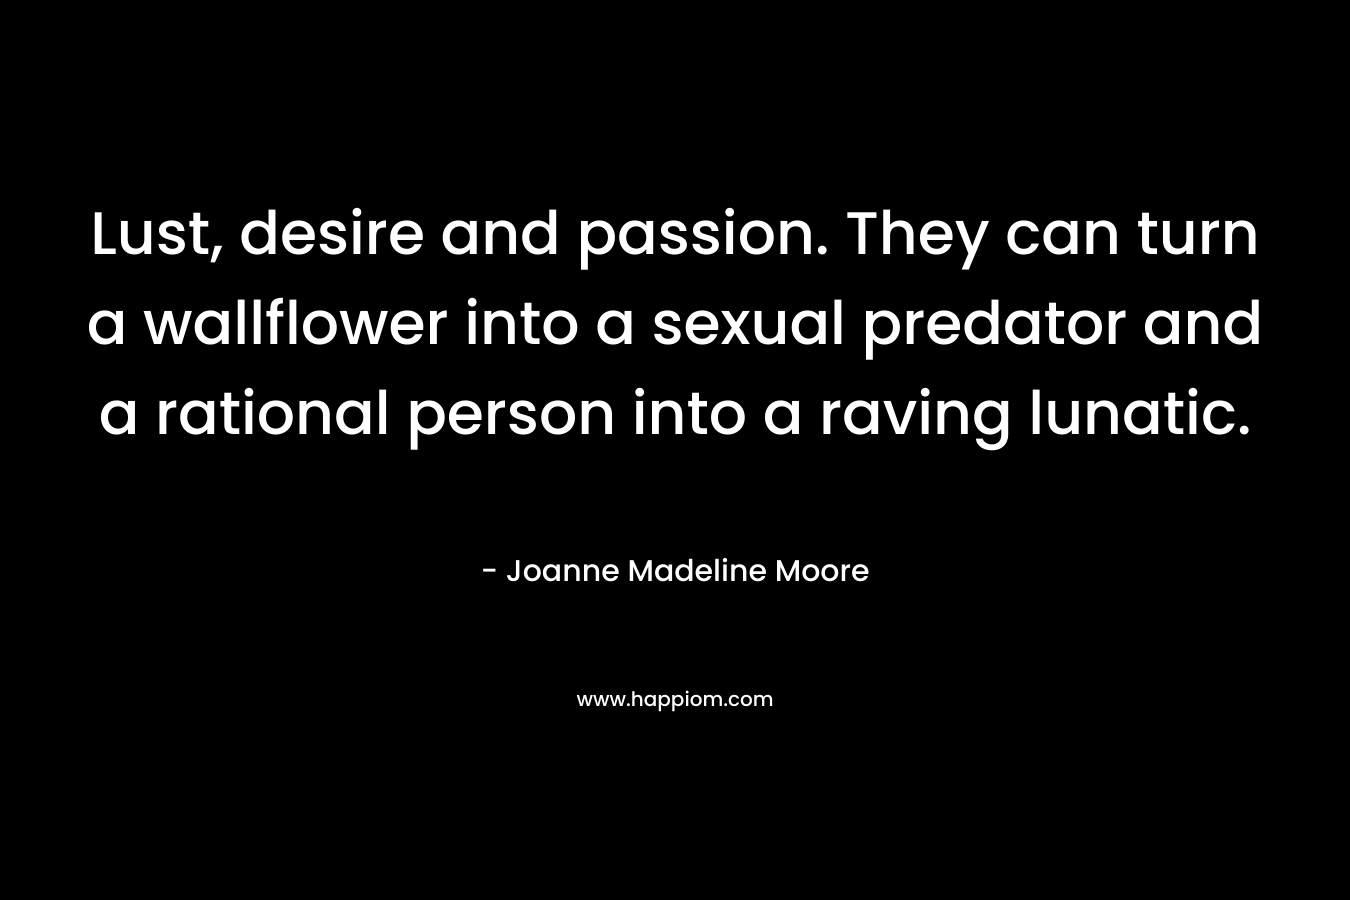 Lust, desire and passion. They can turn a wallflower into a sexual predator and a rational person into a raving lunatic. – Joanne Madeline Moore